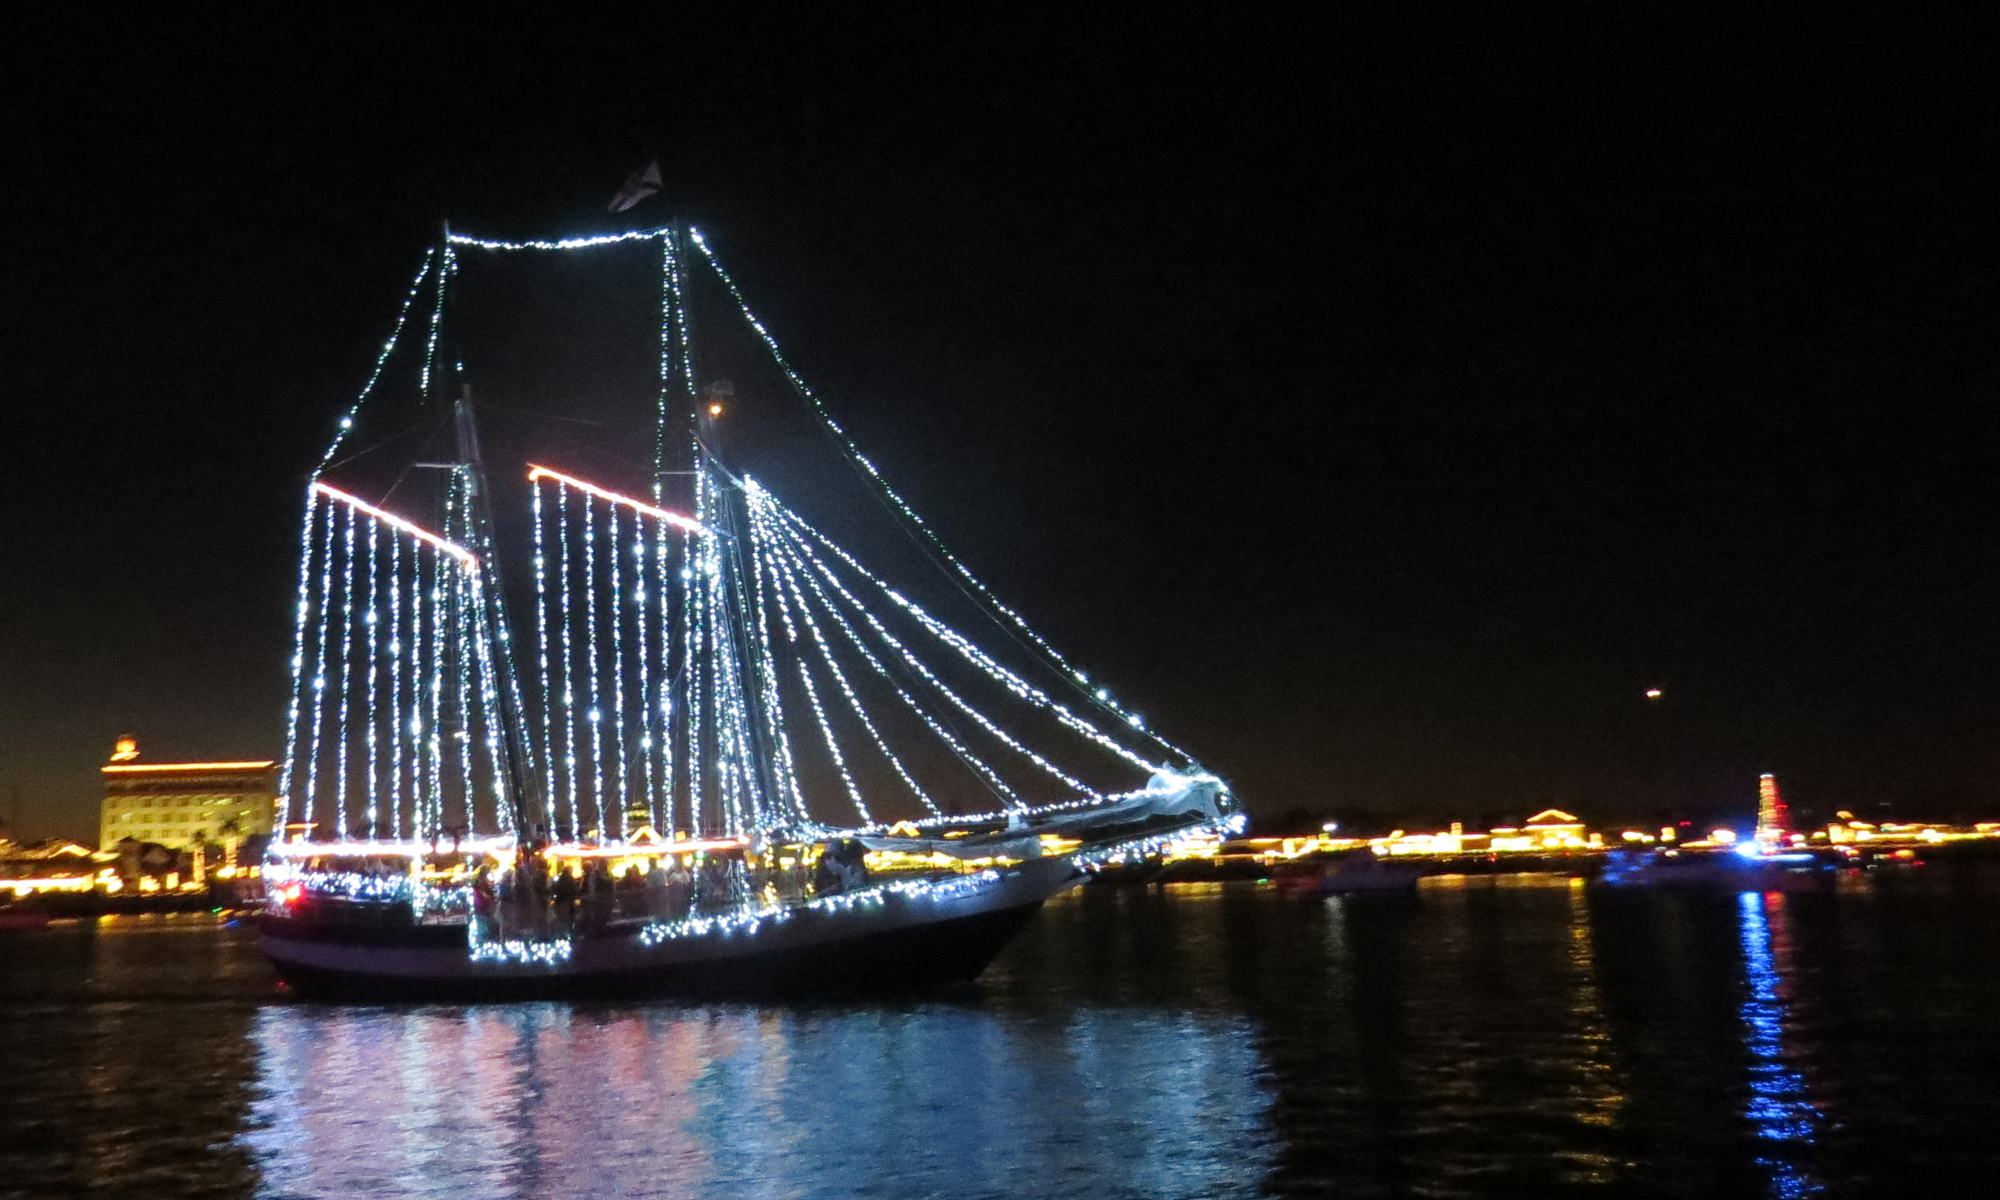 The Schooner Freedom participating in the Regatta of Lights in St. Augustine.